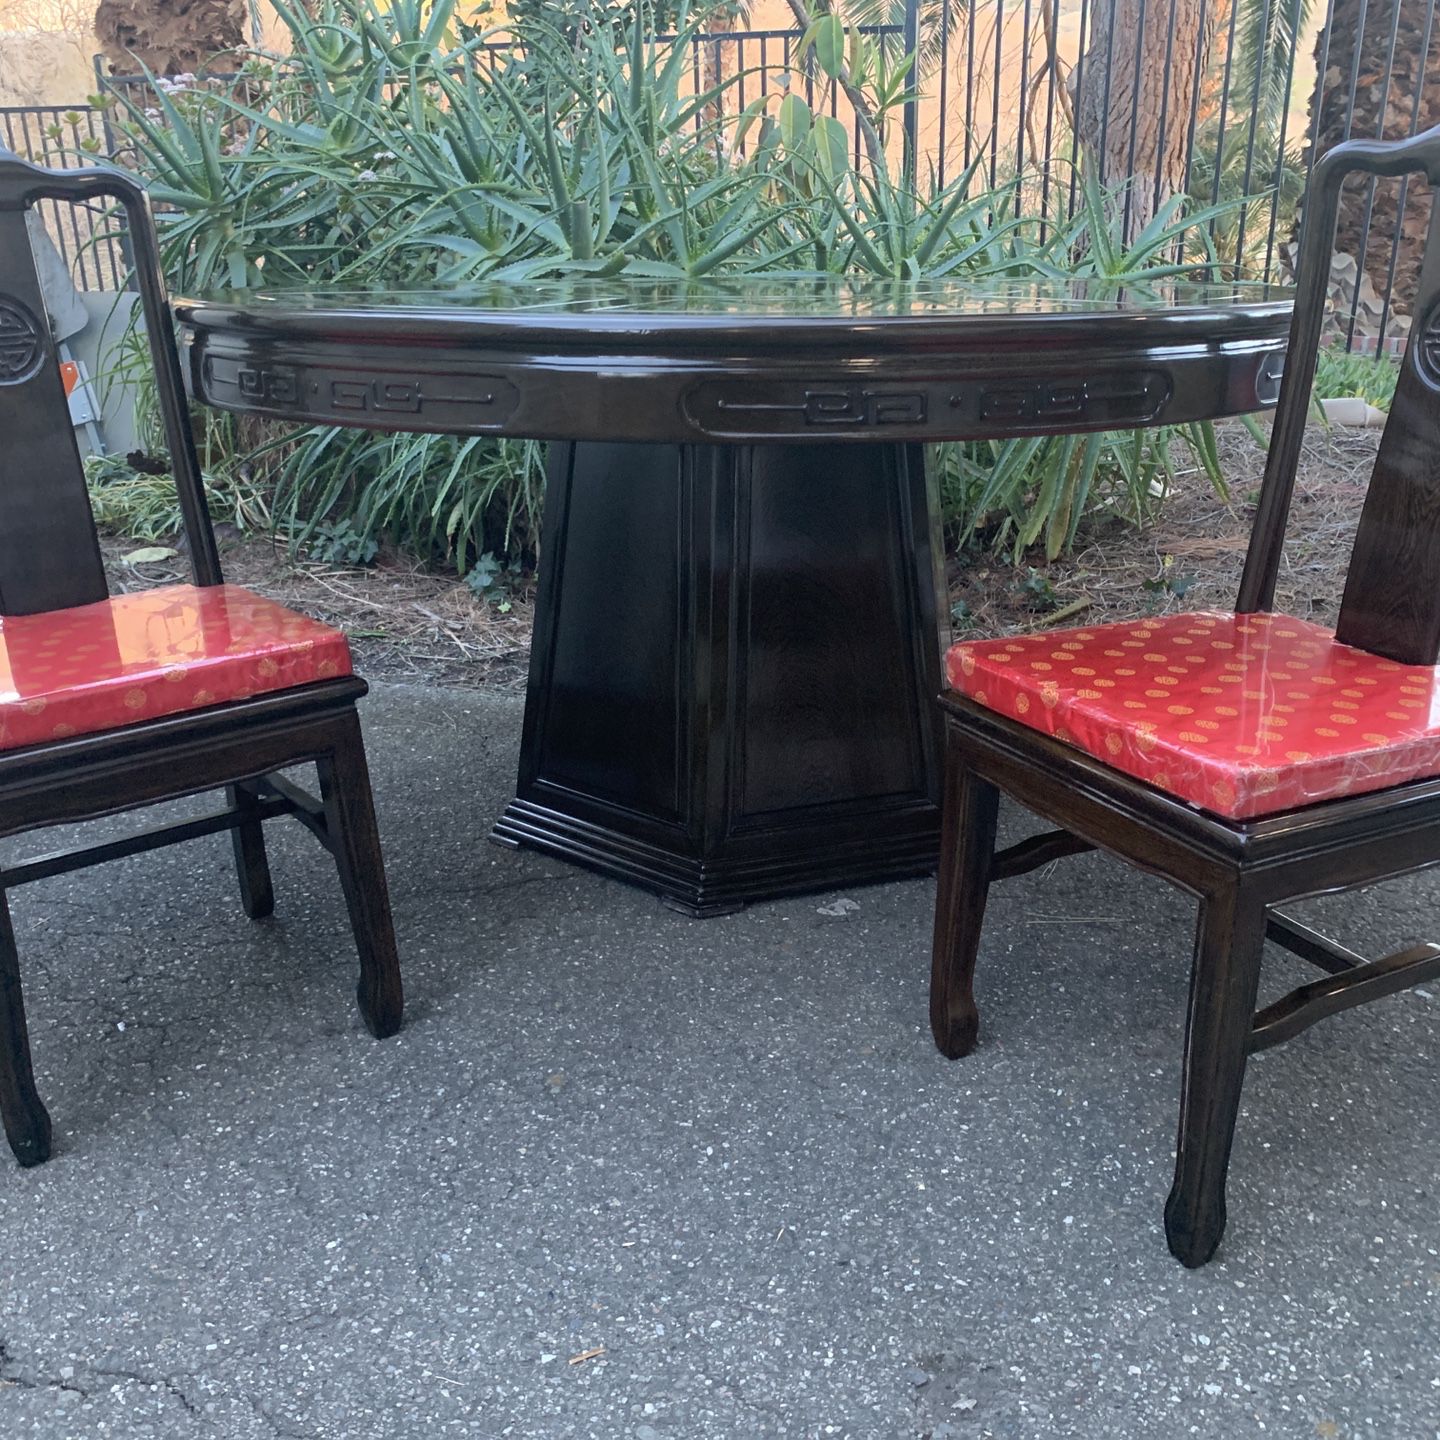 Dining Room Table And 8 Chairs , Vinage Shipped From China In Early 1970s. Cherry Wood , with Desighn On Table And Chairs .